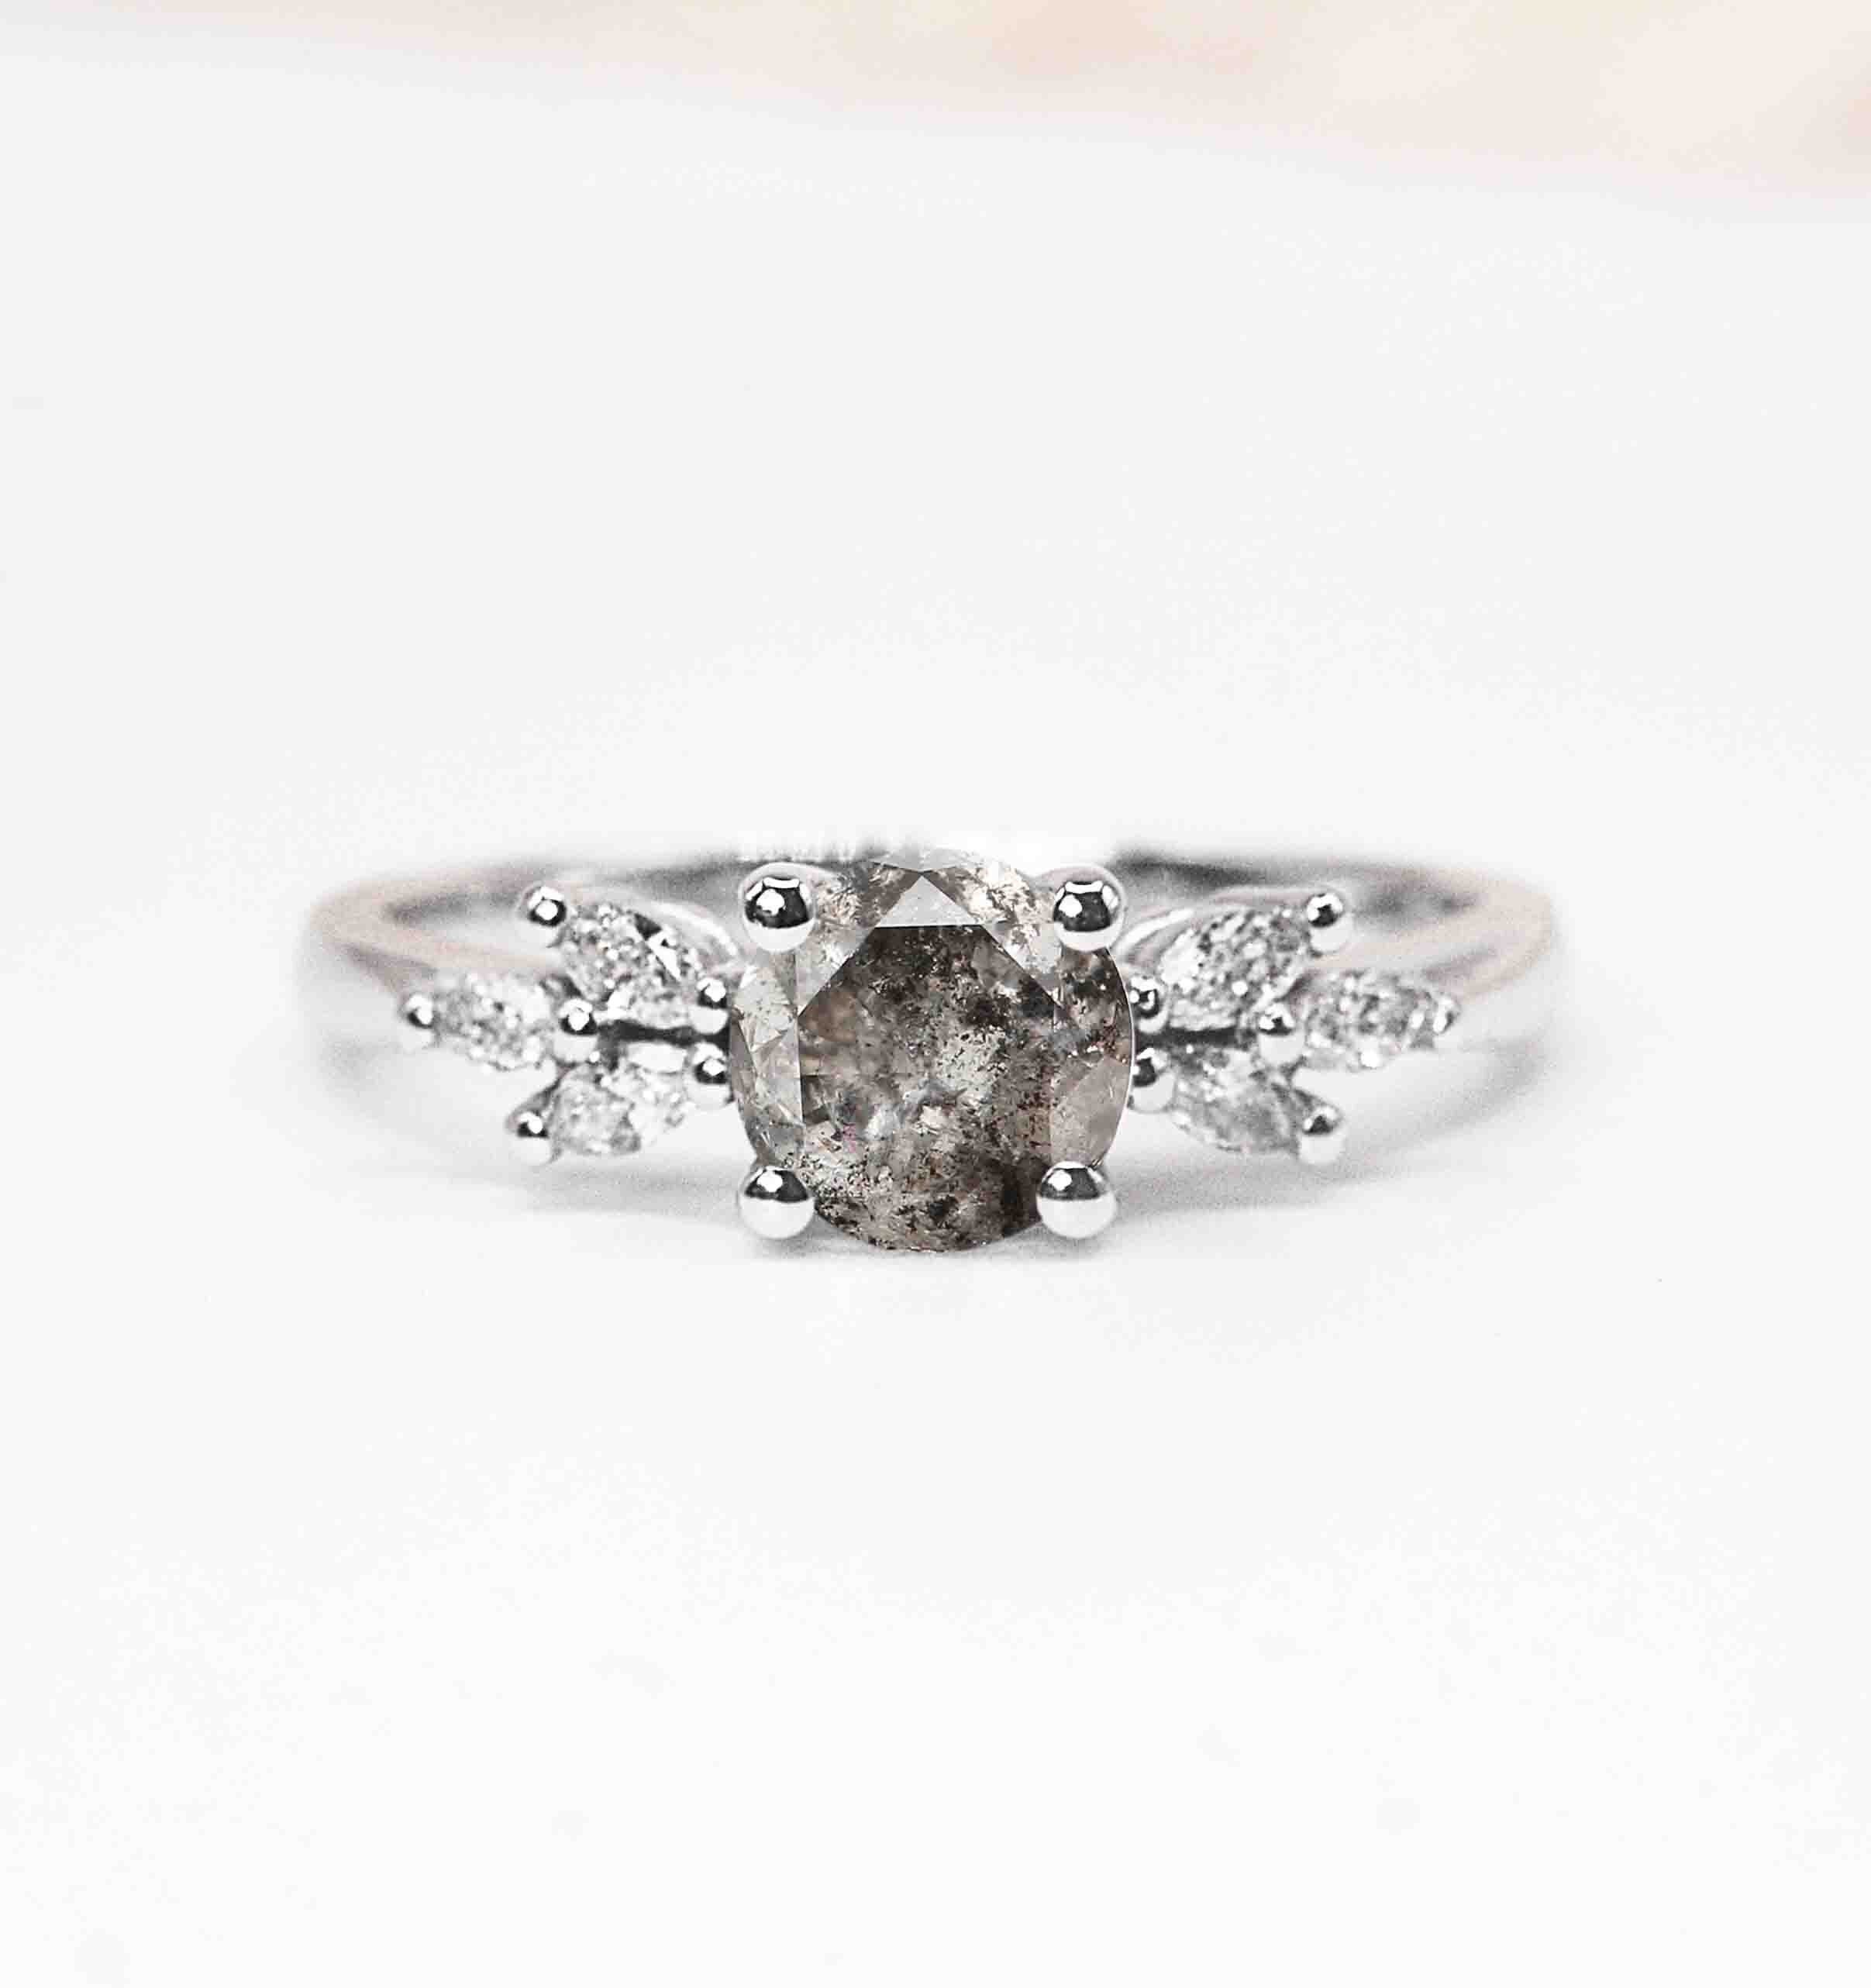 Salt & Pepper Diamond Vintage Engagement Ring | Natural Grey Featuring |Solid White/Yellow/Rose Gold Stylish Celebrity